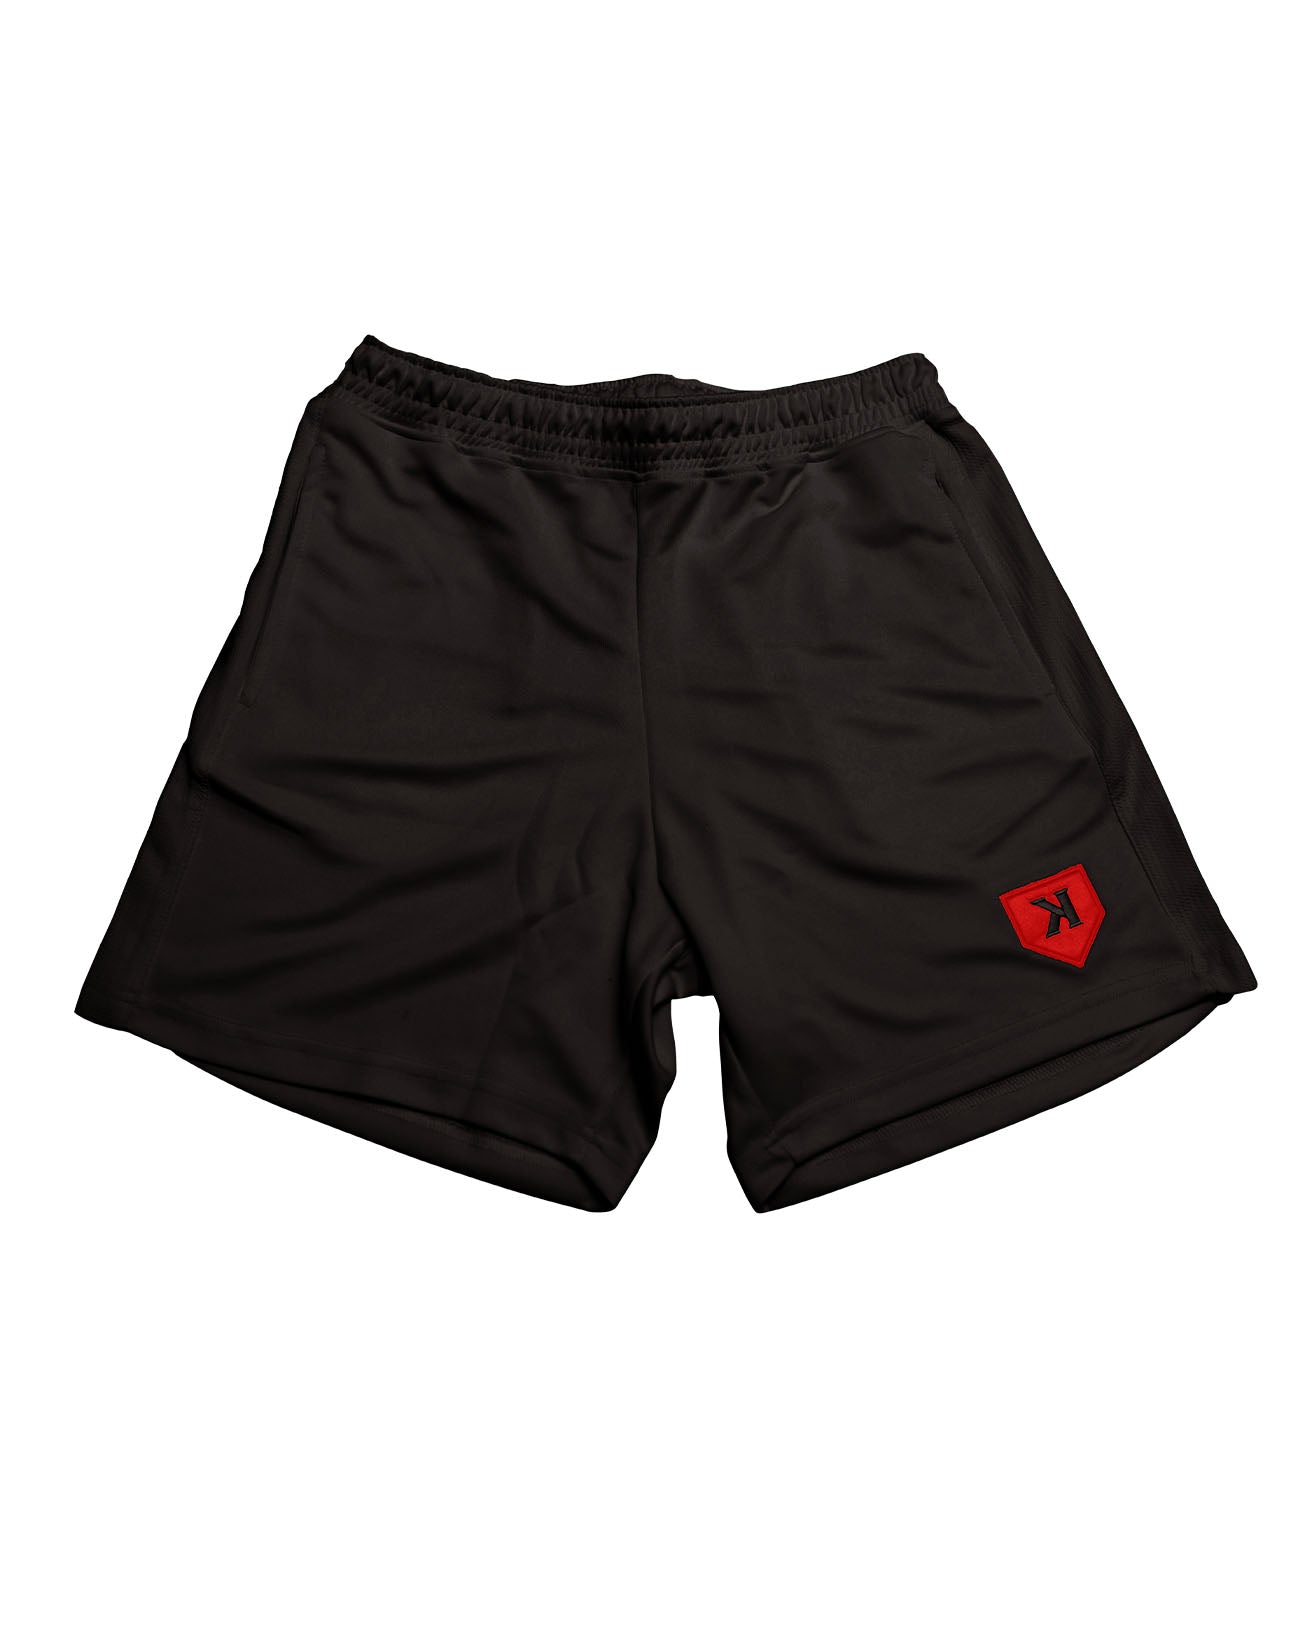 YOUTH Black/Red Performance Shorts